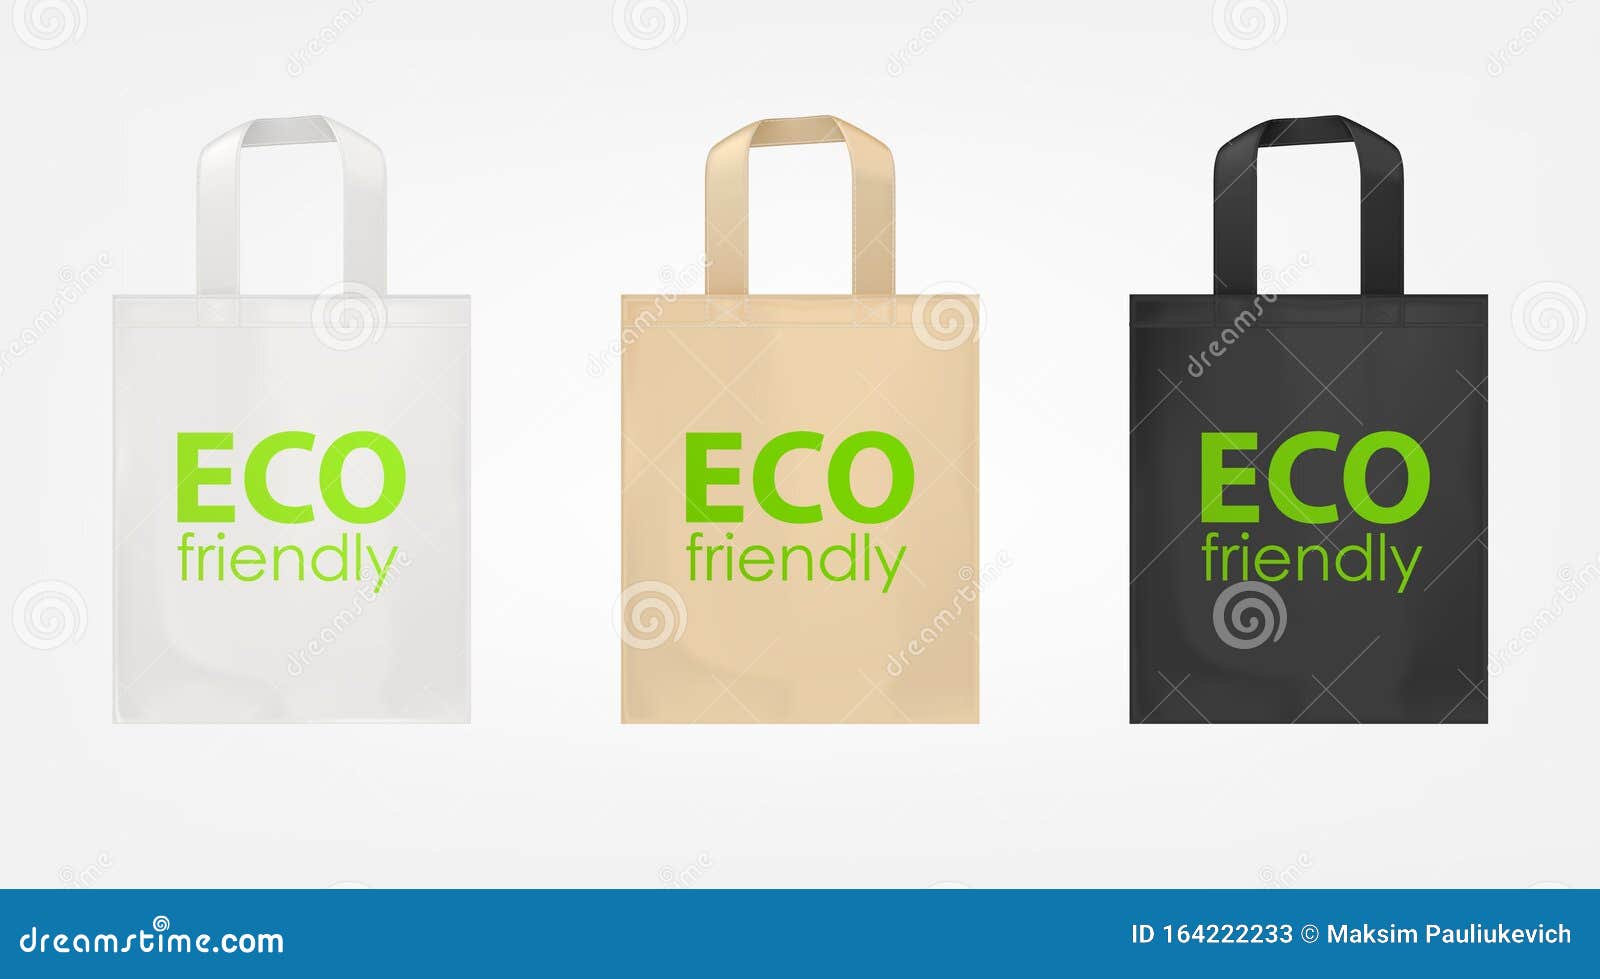 Tote shopping eco bags stock vector. Illustration of background - 164222233